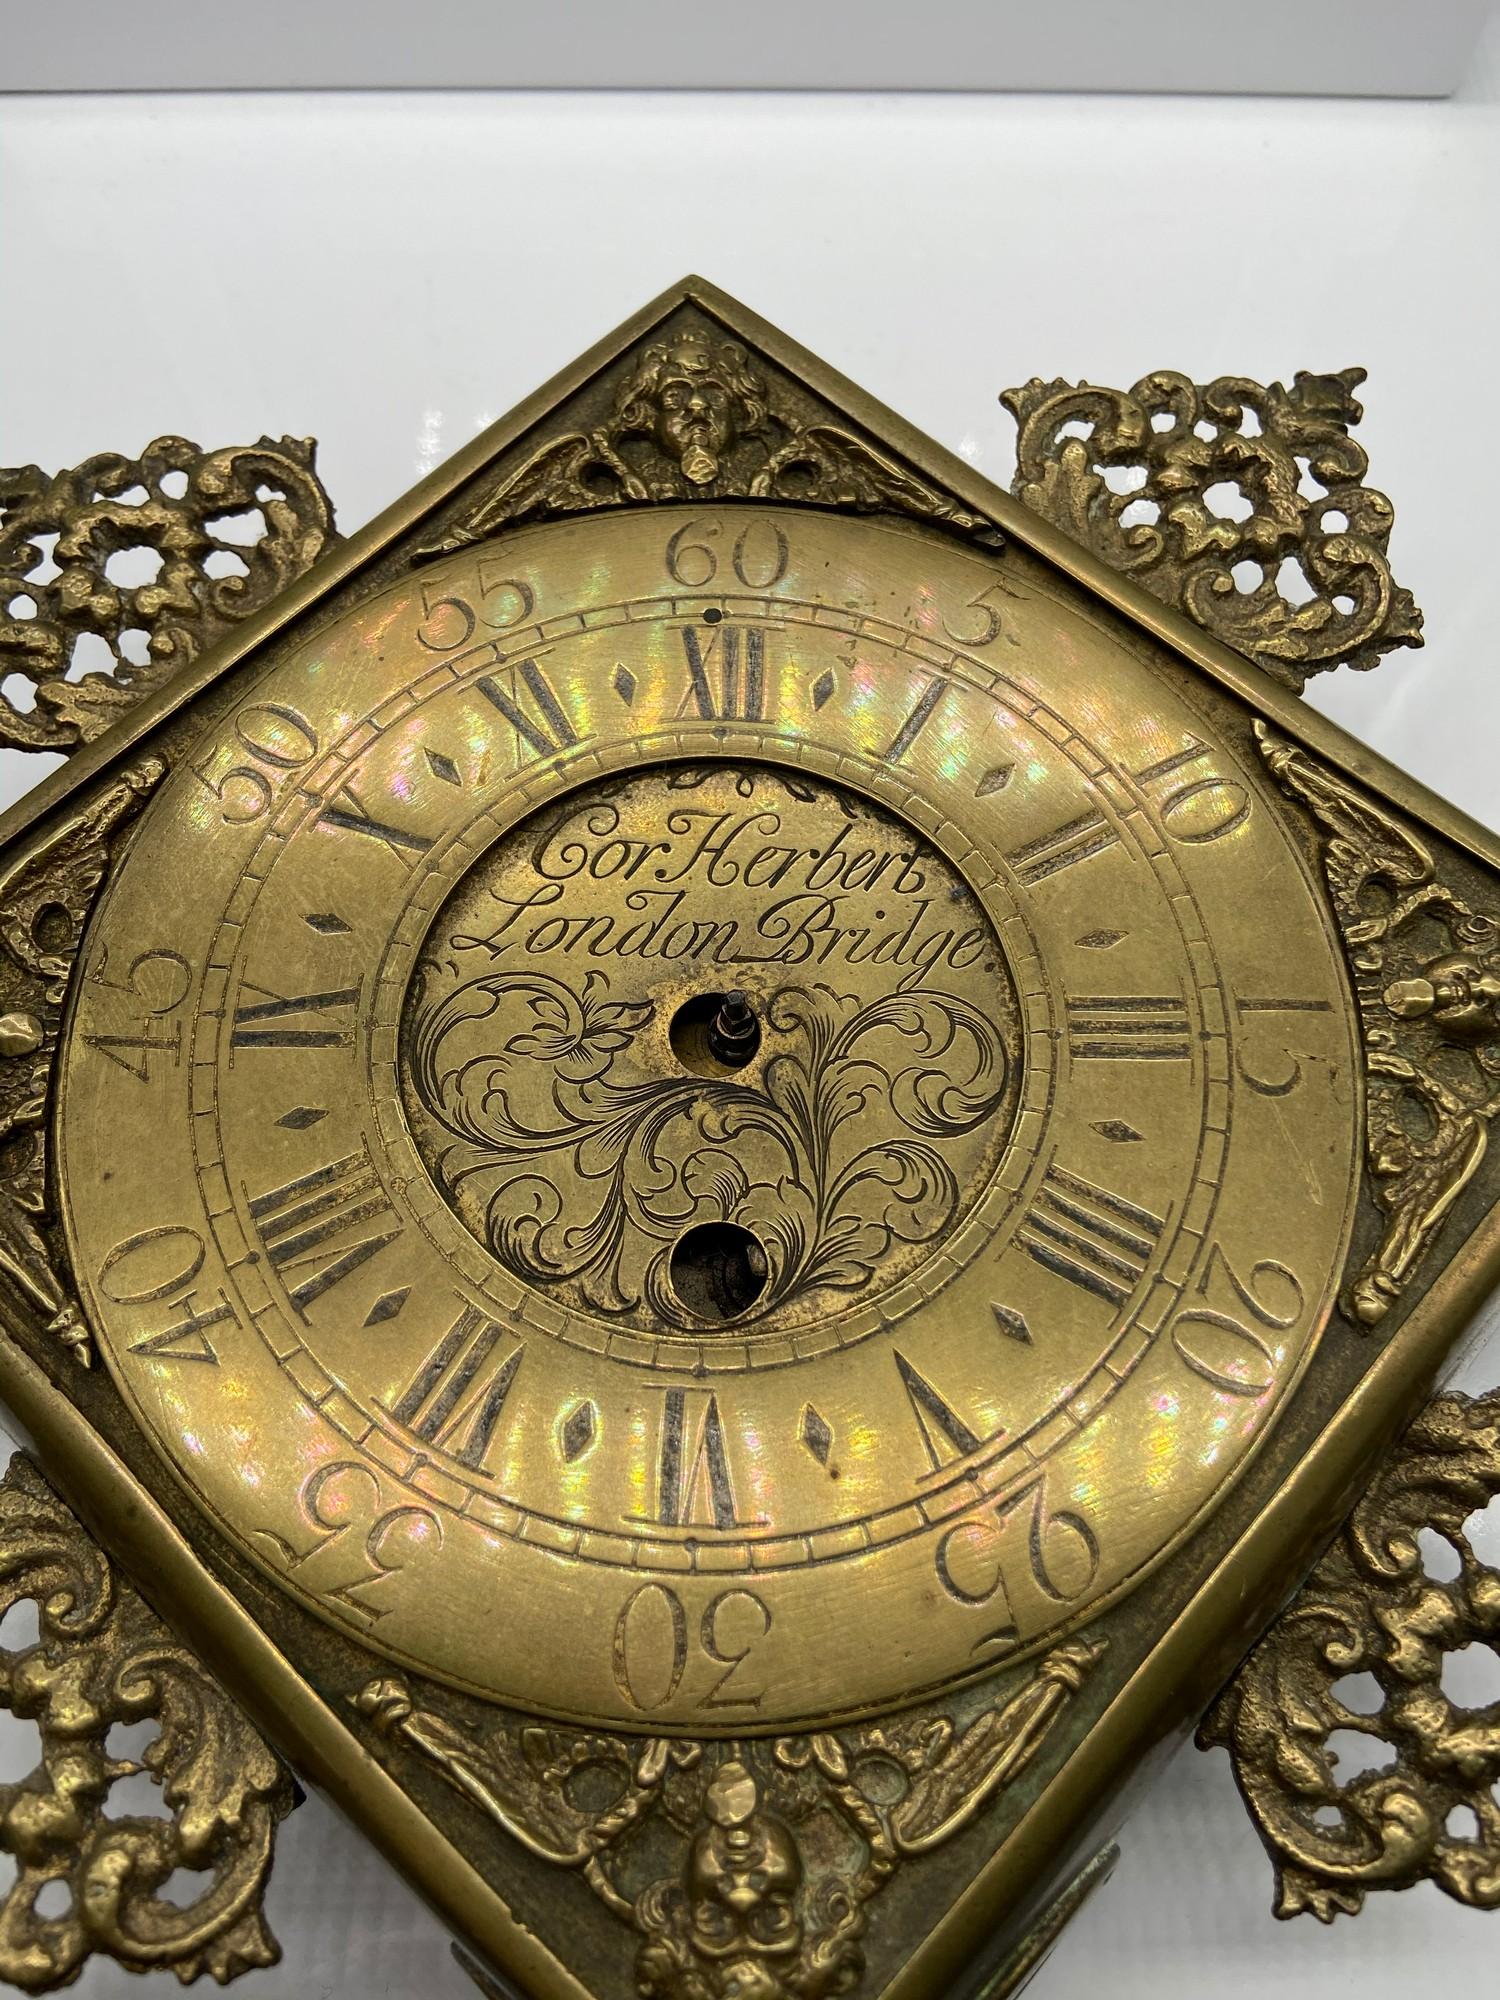 Antique brass wall clock engraved 'Cor Herbert London Bridge' Designed with a French clock movement. - Image 4 of 7